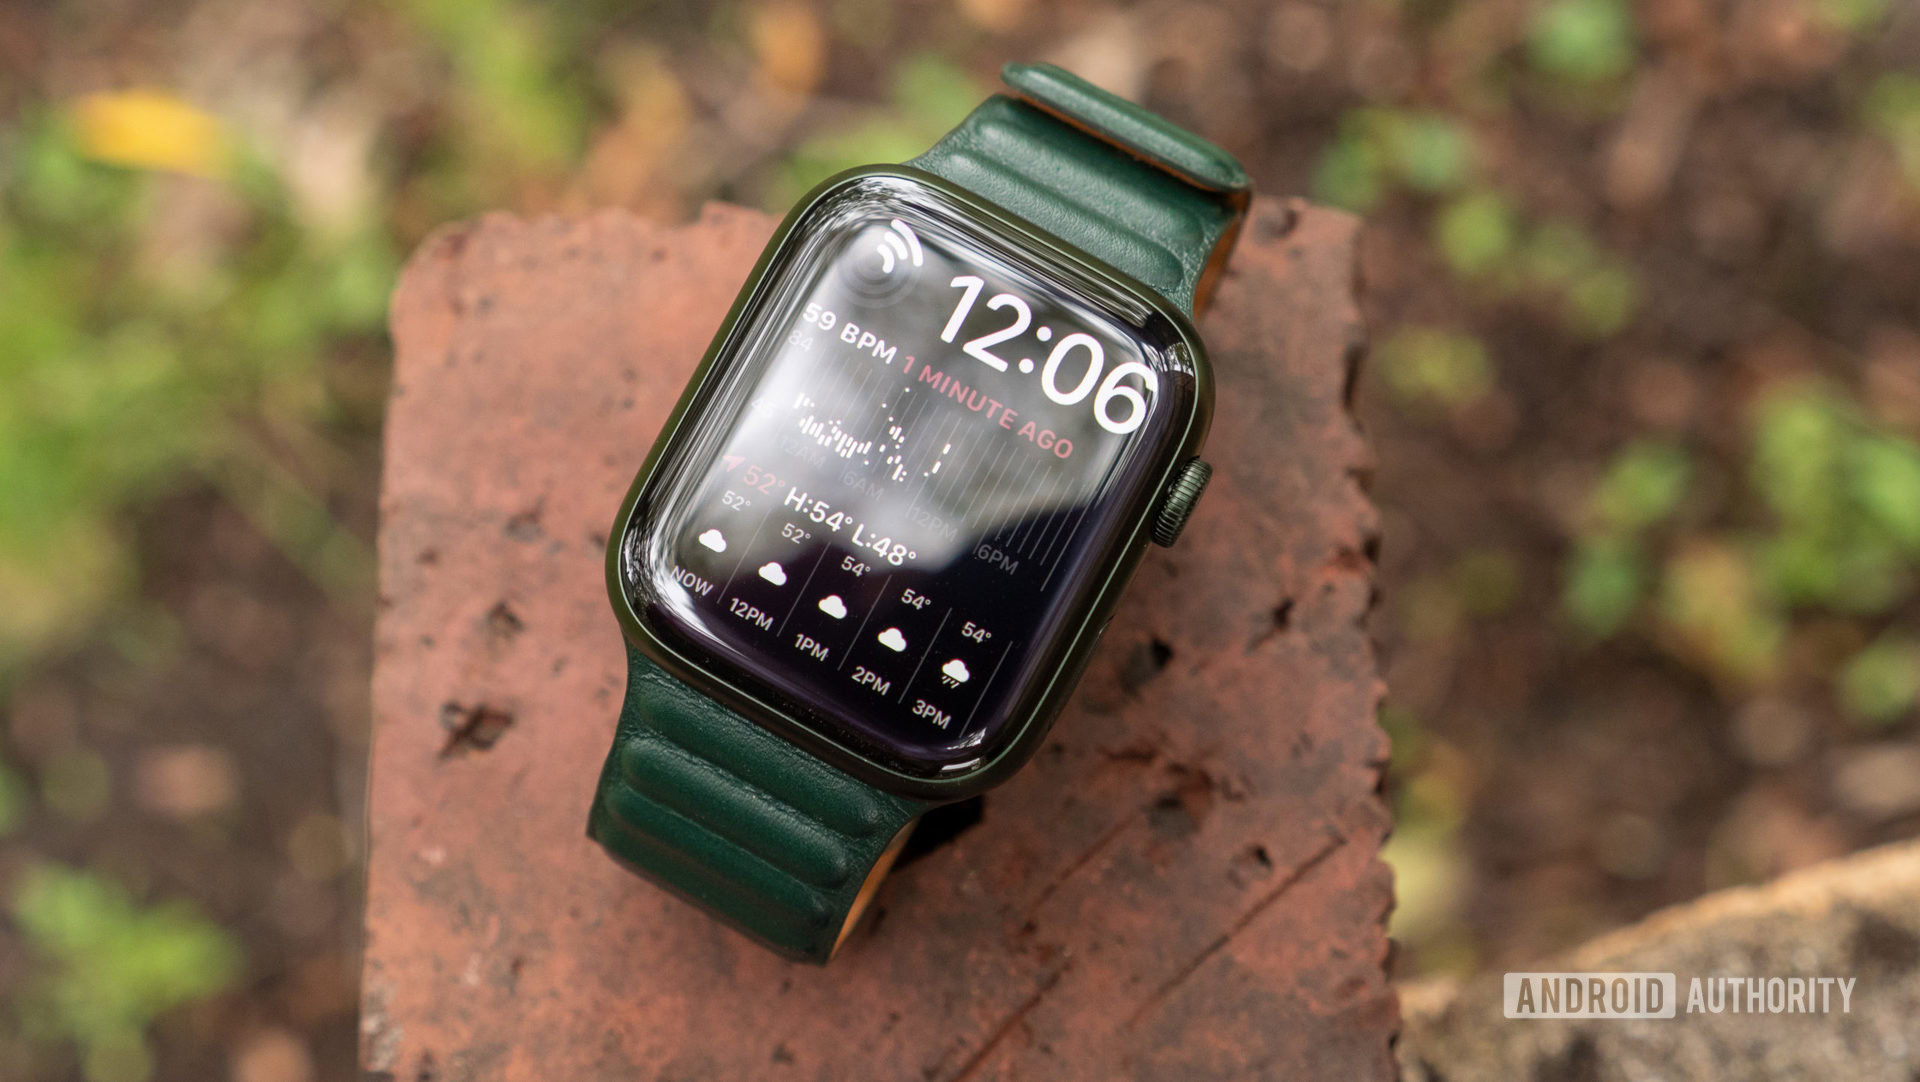 Apple Watch Series 7 review: Now an even better value